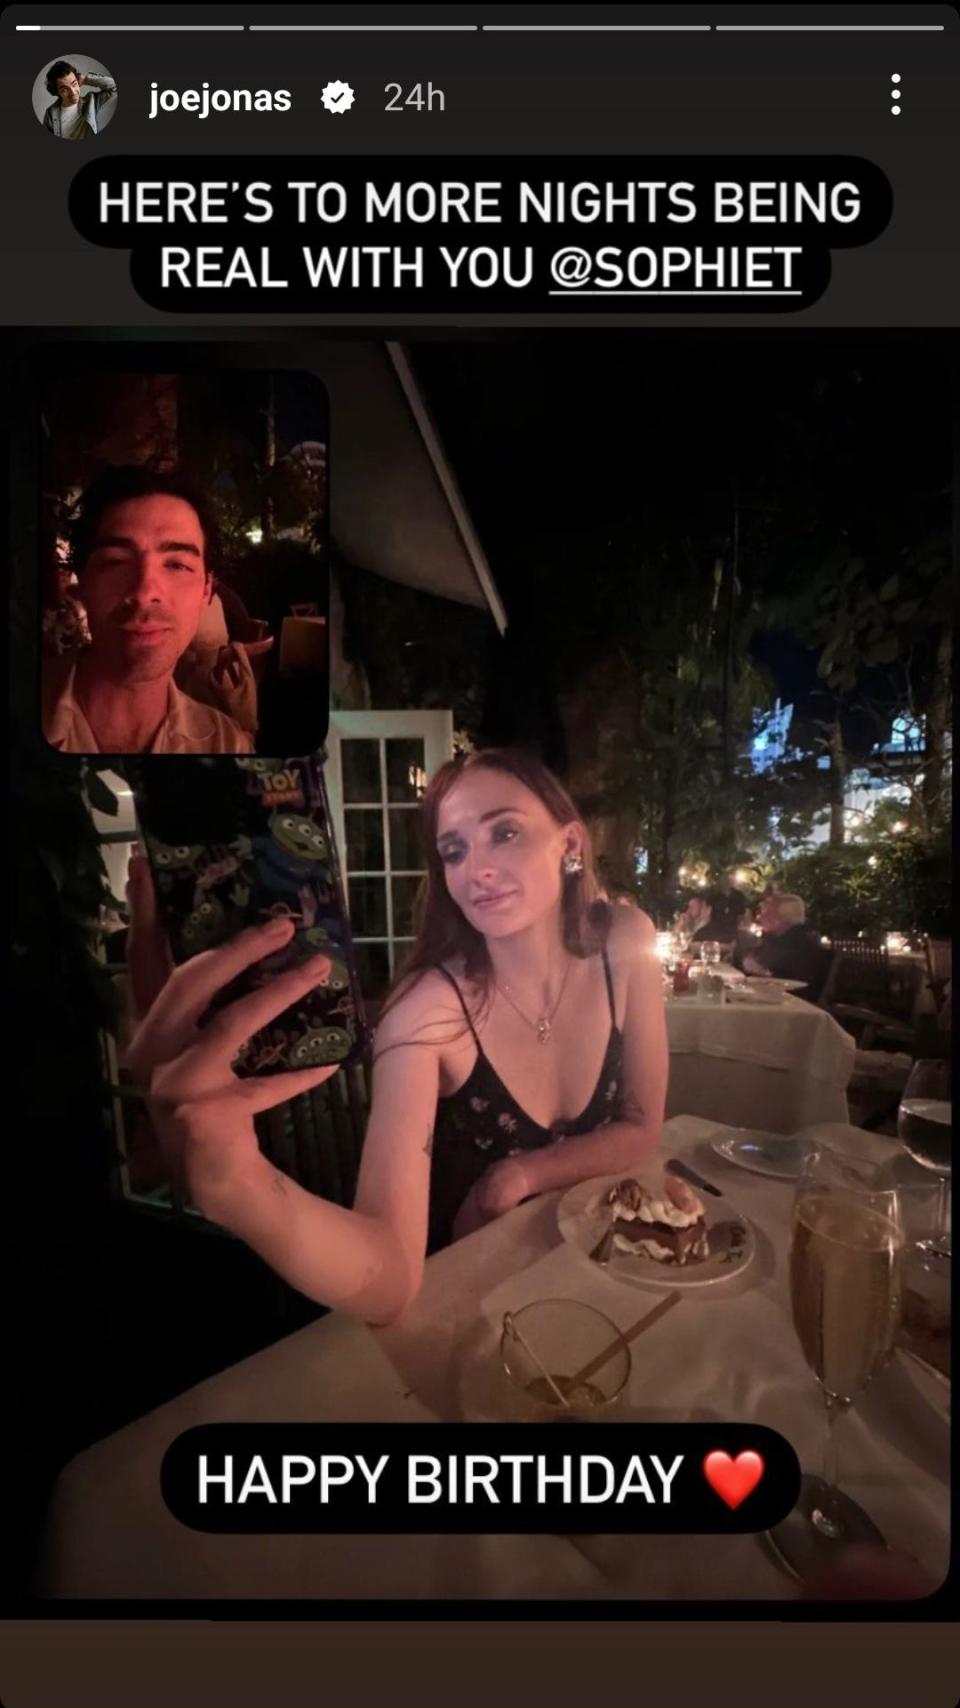 Joe Jonas and Sophie Turner in a photo shared on his Instagram story in February 2023.